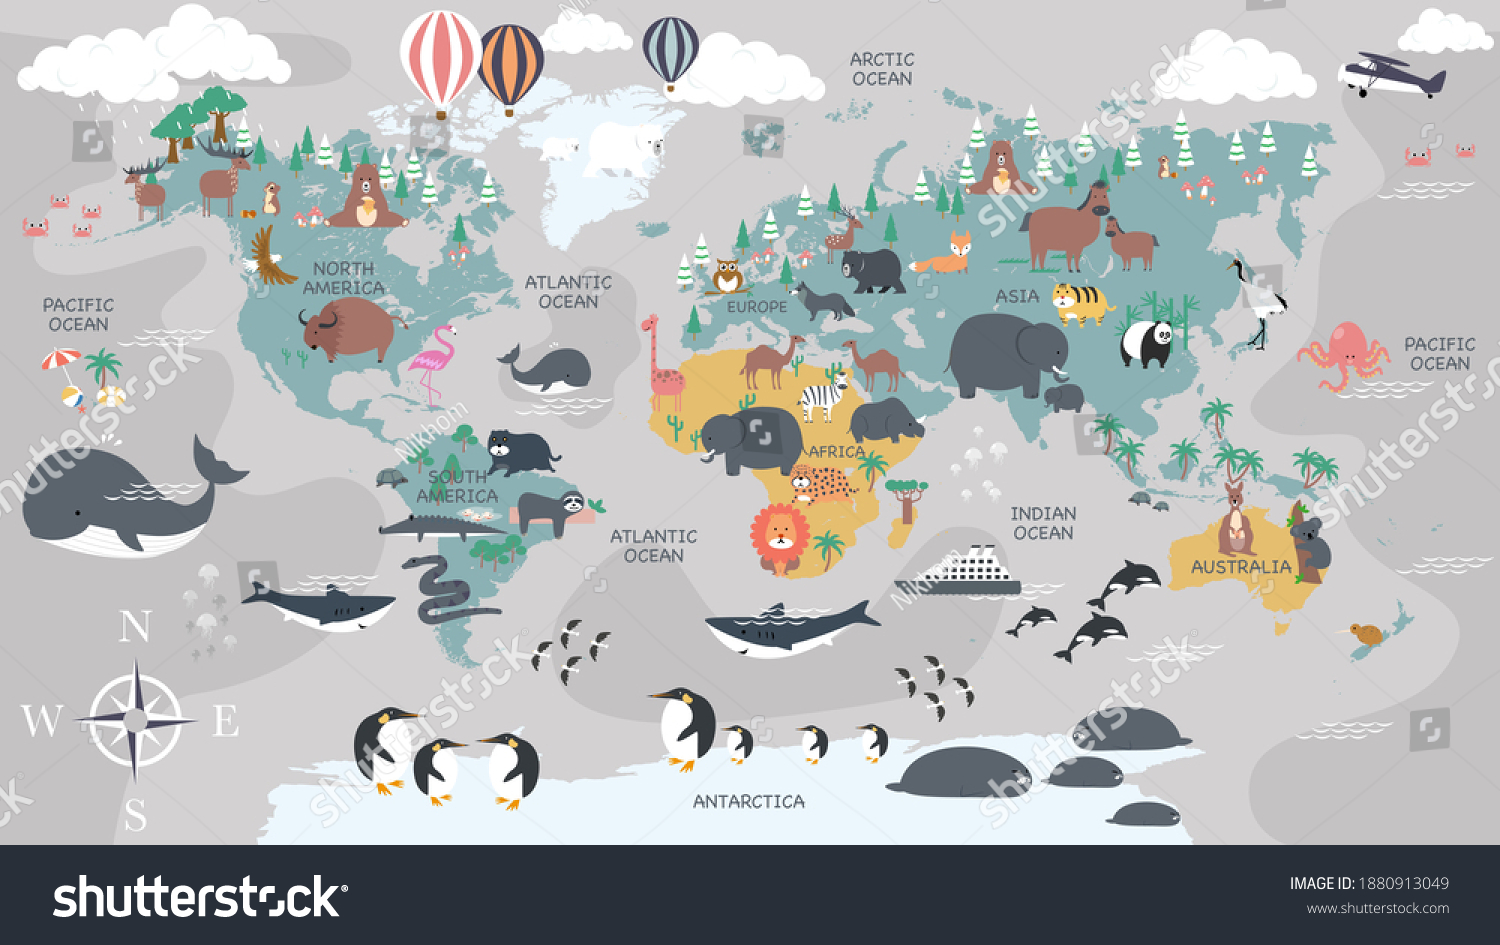 The world map with cartoon animals for kids, nature, discovery and continent name, ocean name, countries name. vector Illustration. #1880913049